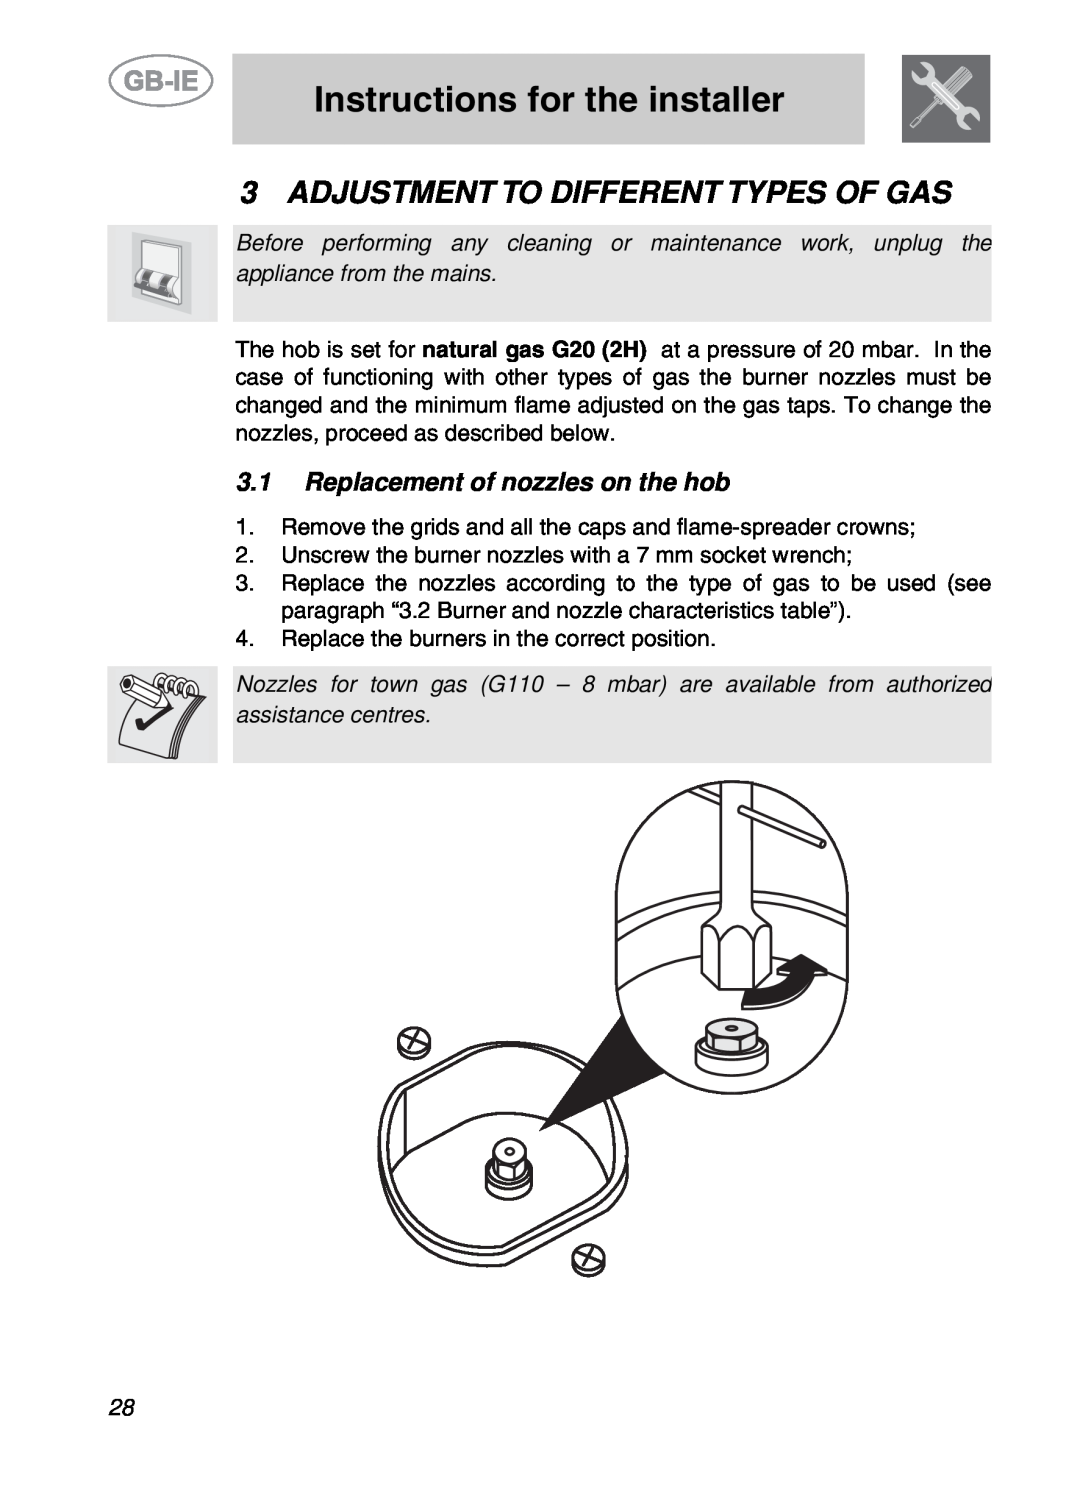 Smeg PGF95K-3 Adjustment To Different Types Of Gas, Replacement of nozzles on the hob, Instructions for the installer 